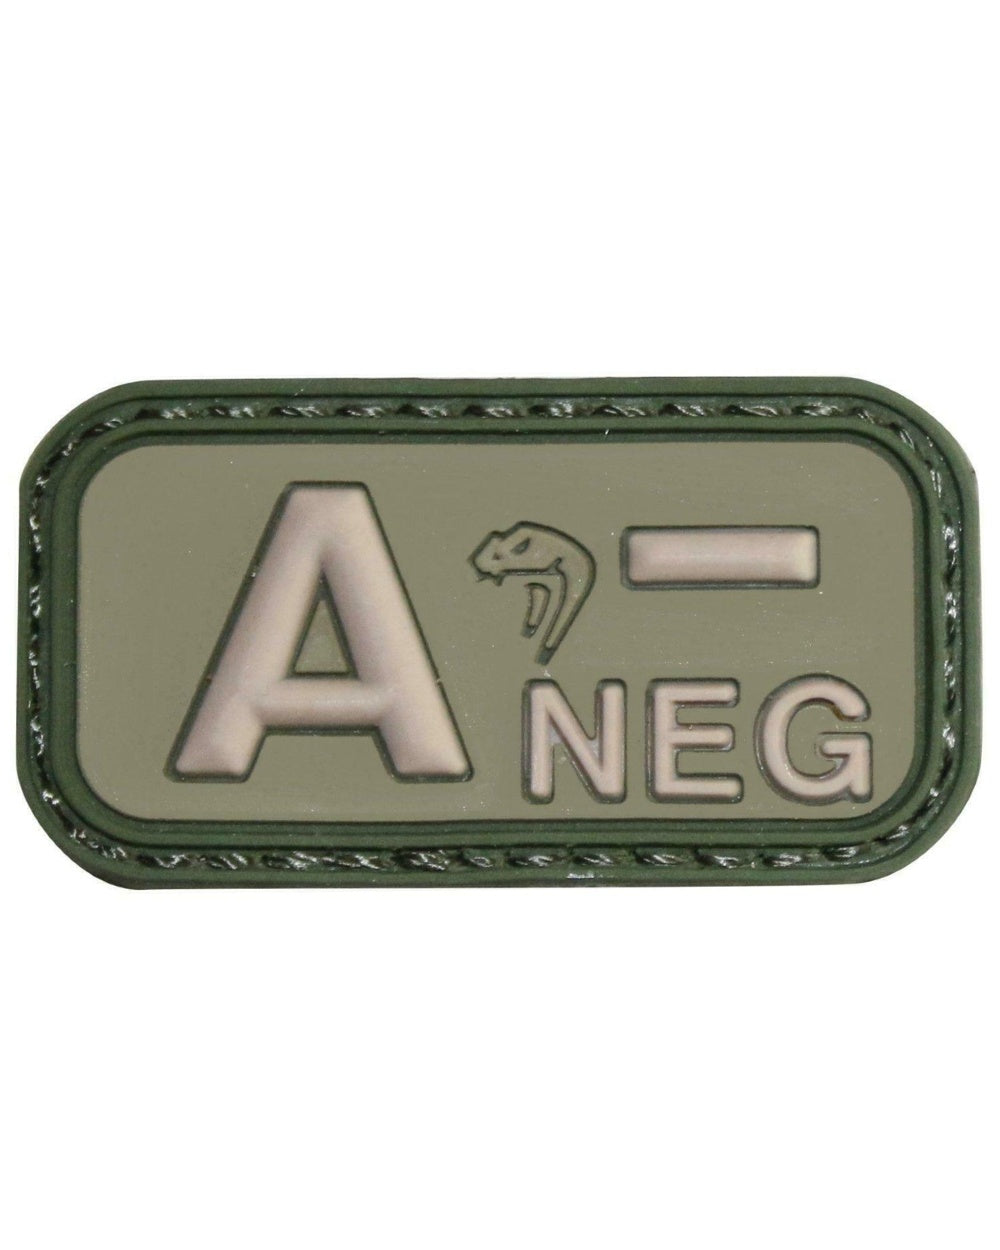 Viper Blood Group Rubber Patch A Neg in Green 